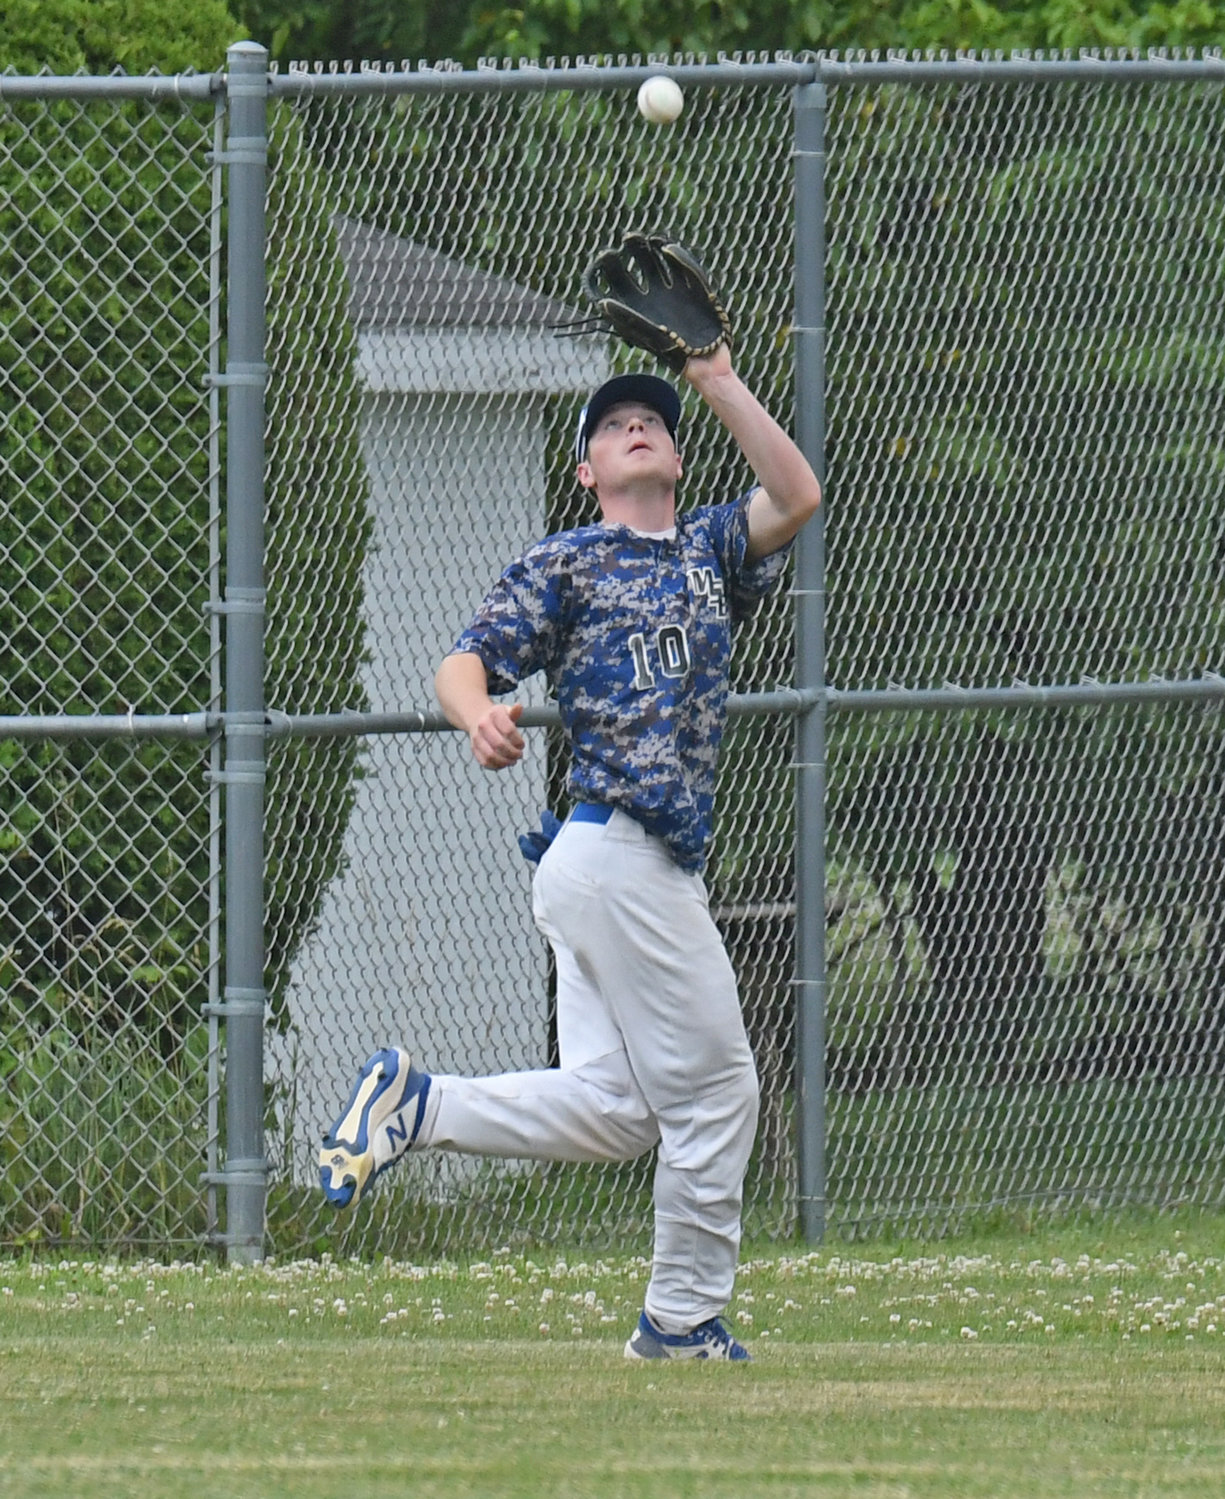 Moran Post outfielder Kohl lngalls makes a catch of long fly ball.